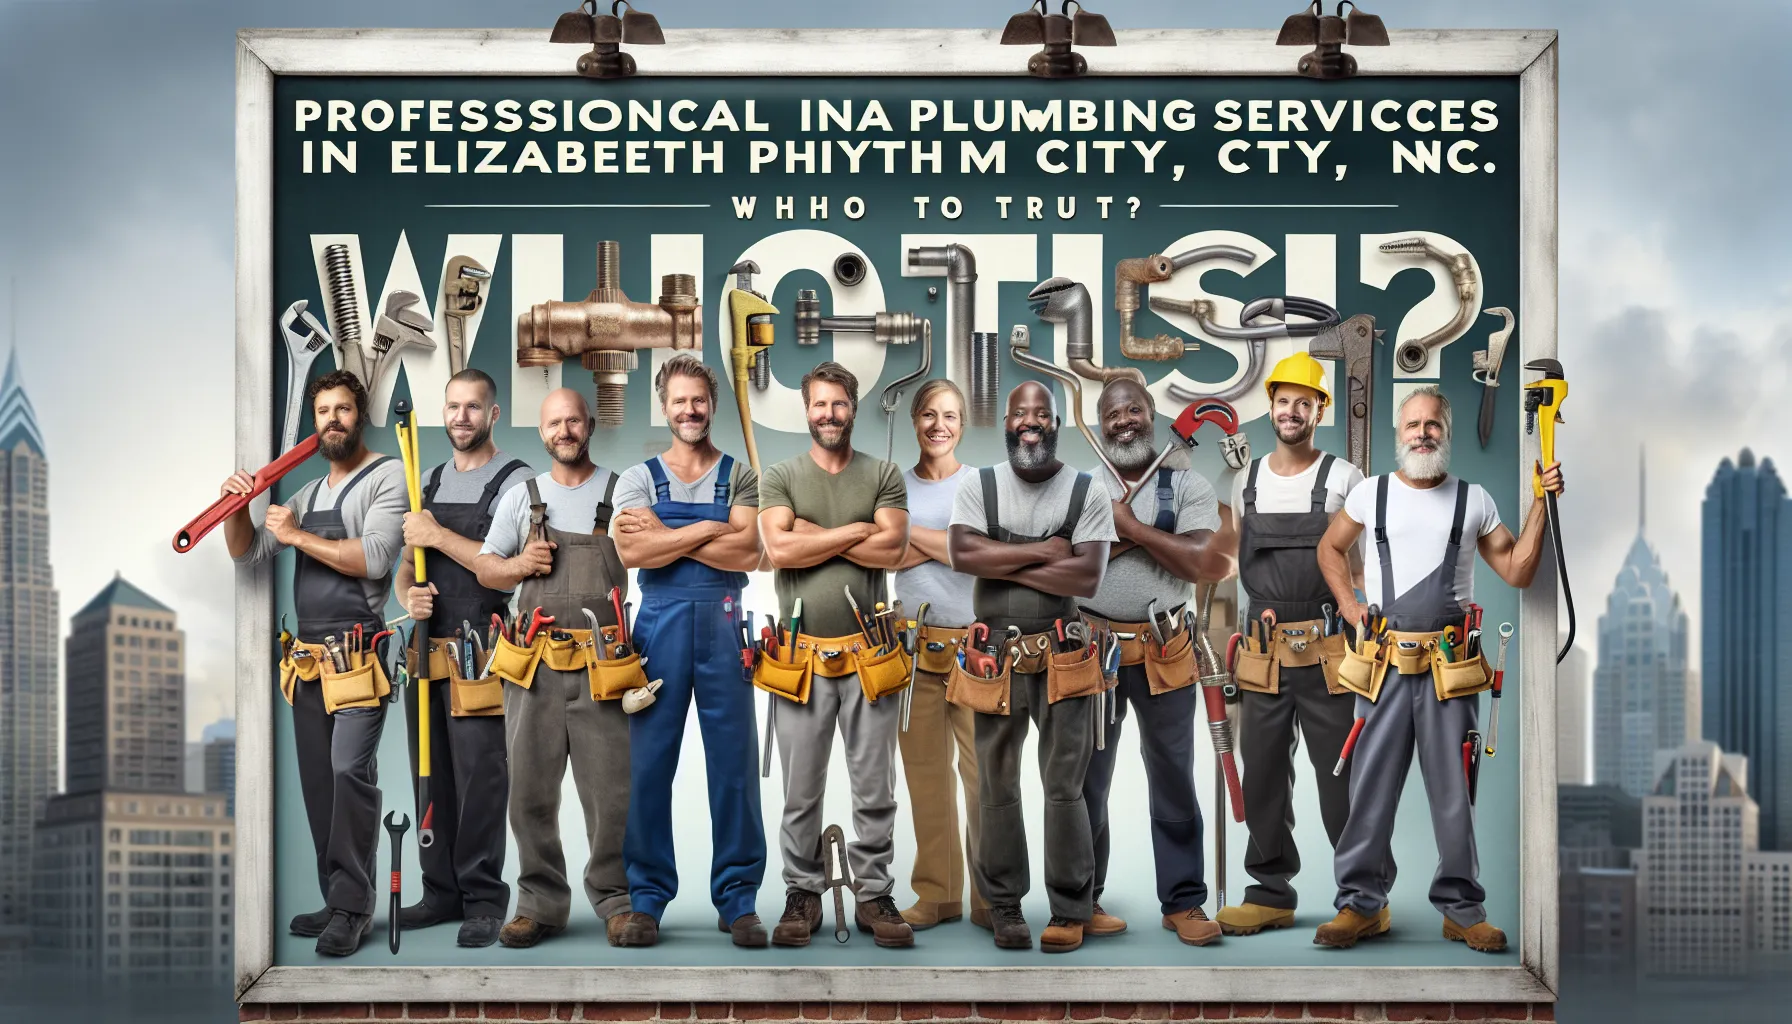 Professional Plumbing Services in Elizabeth City, NC Who to Trust